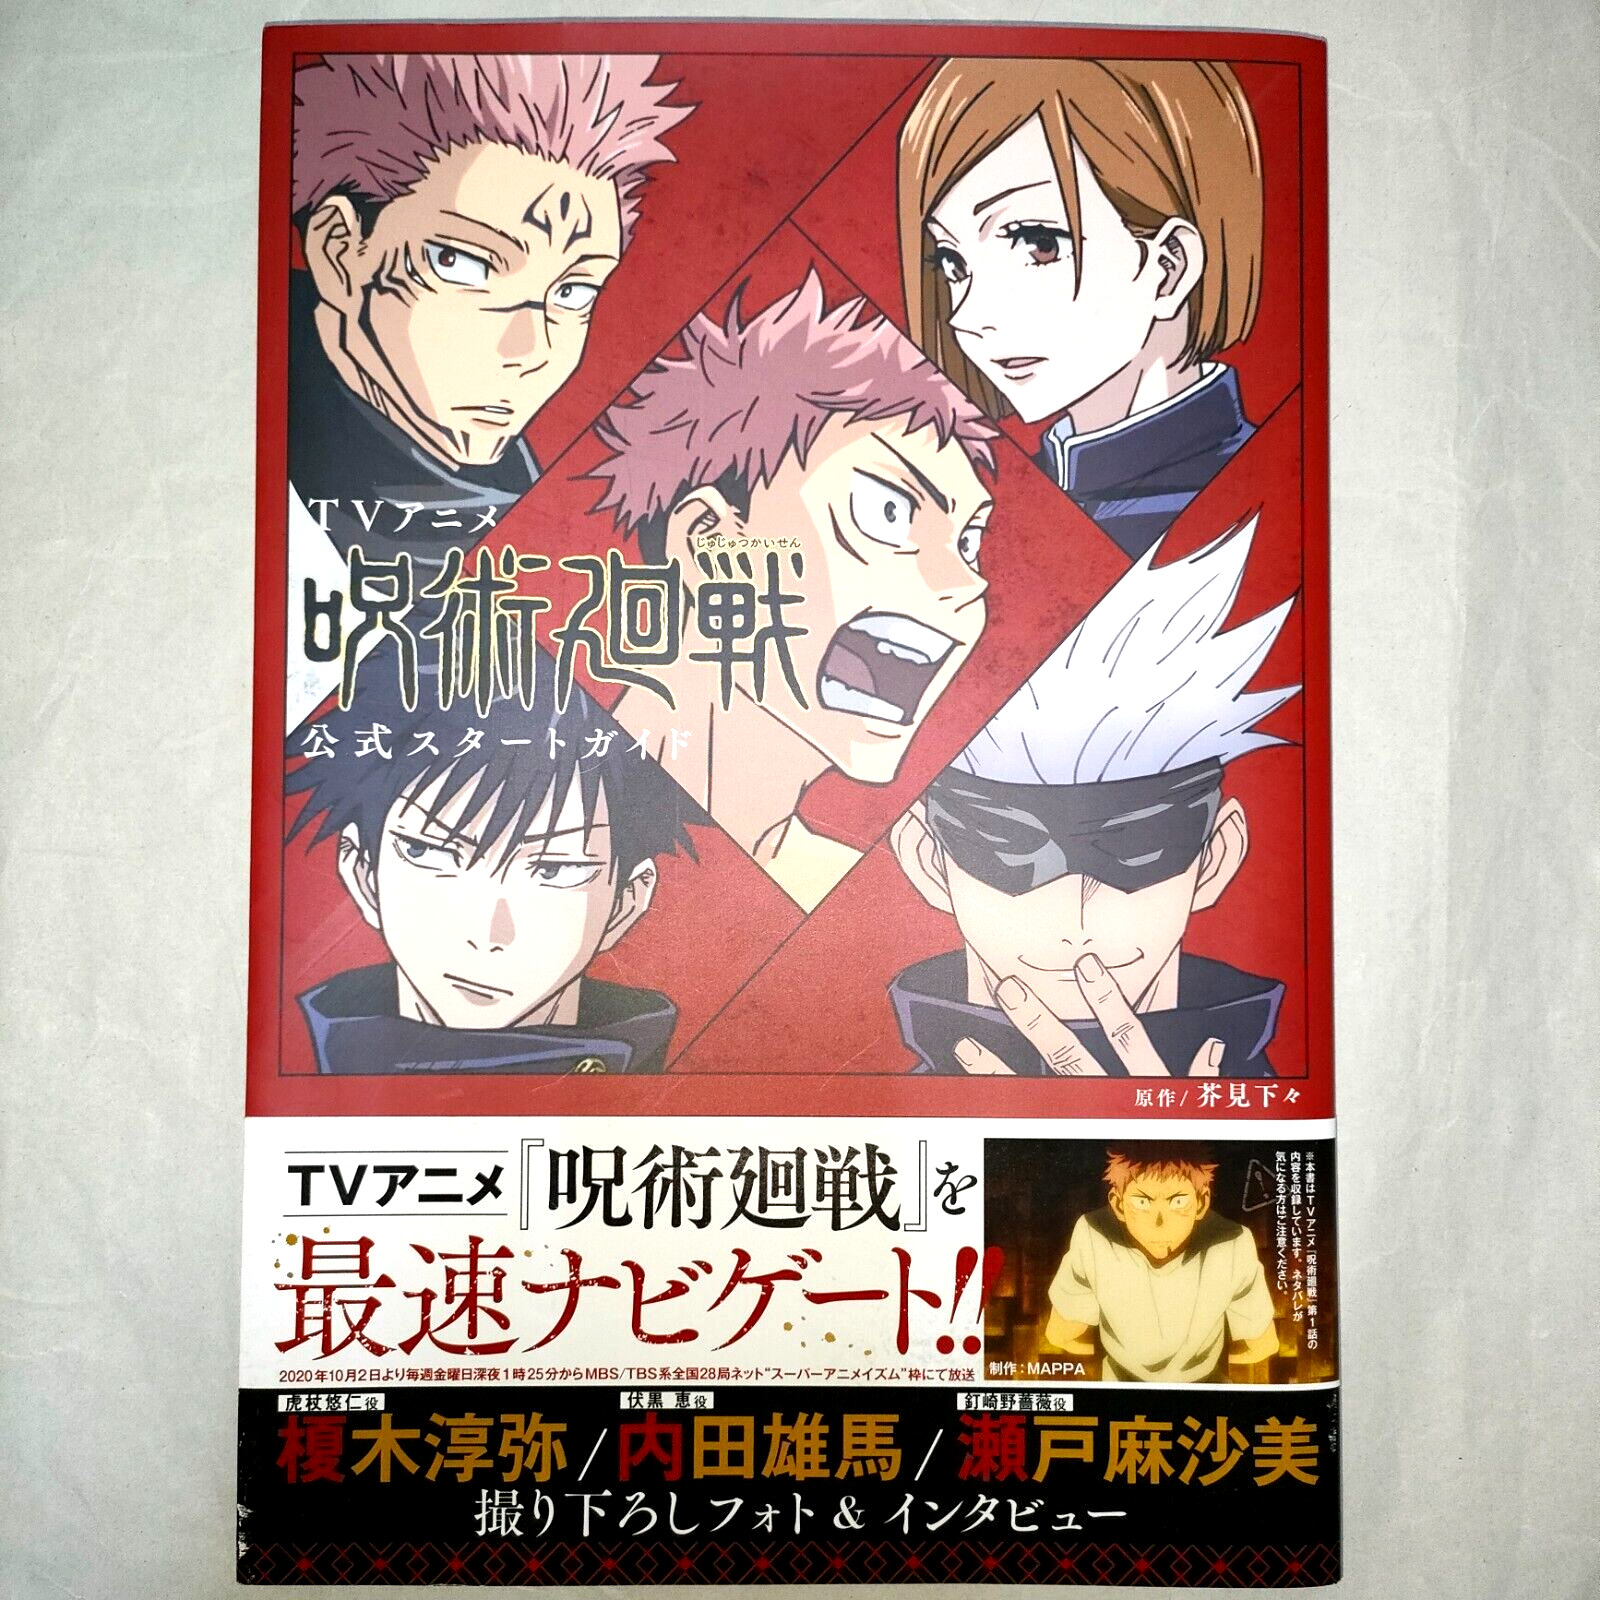 Jujutsu Kaisen Official Start Guide Book With Obi & All appendices w/tracking